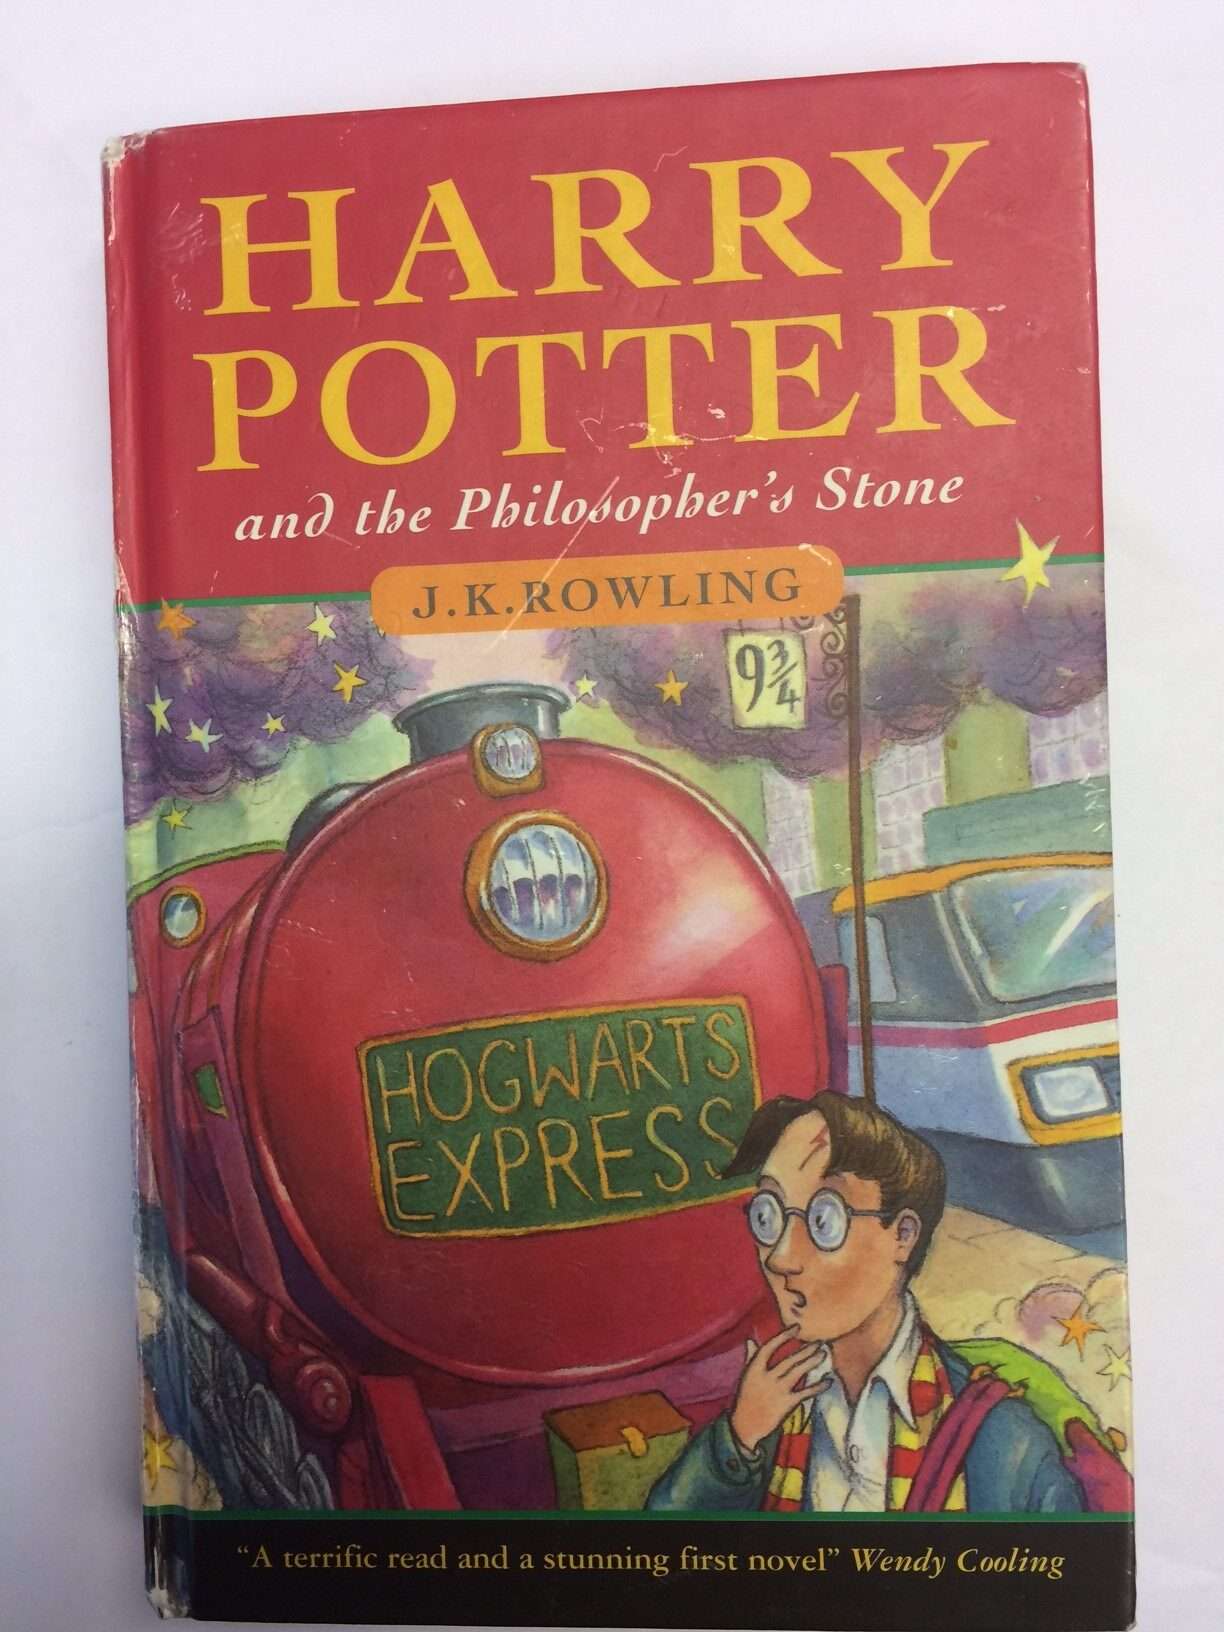 Rare Harry Potter book bought for £1 sells at auction for ...